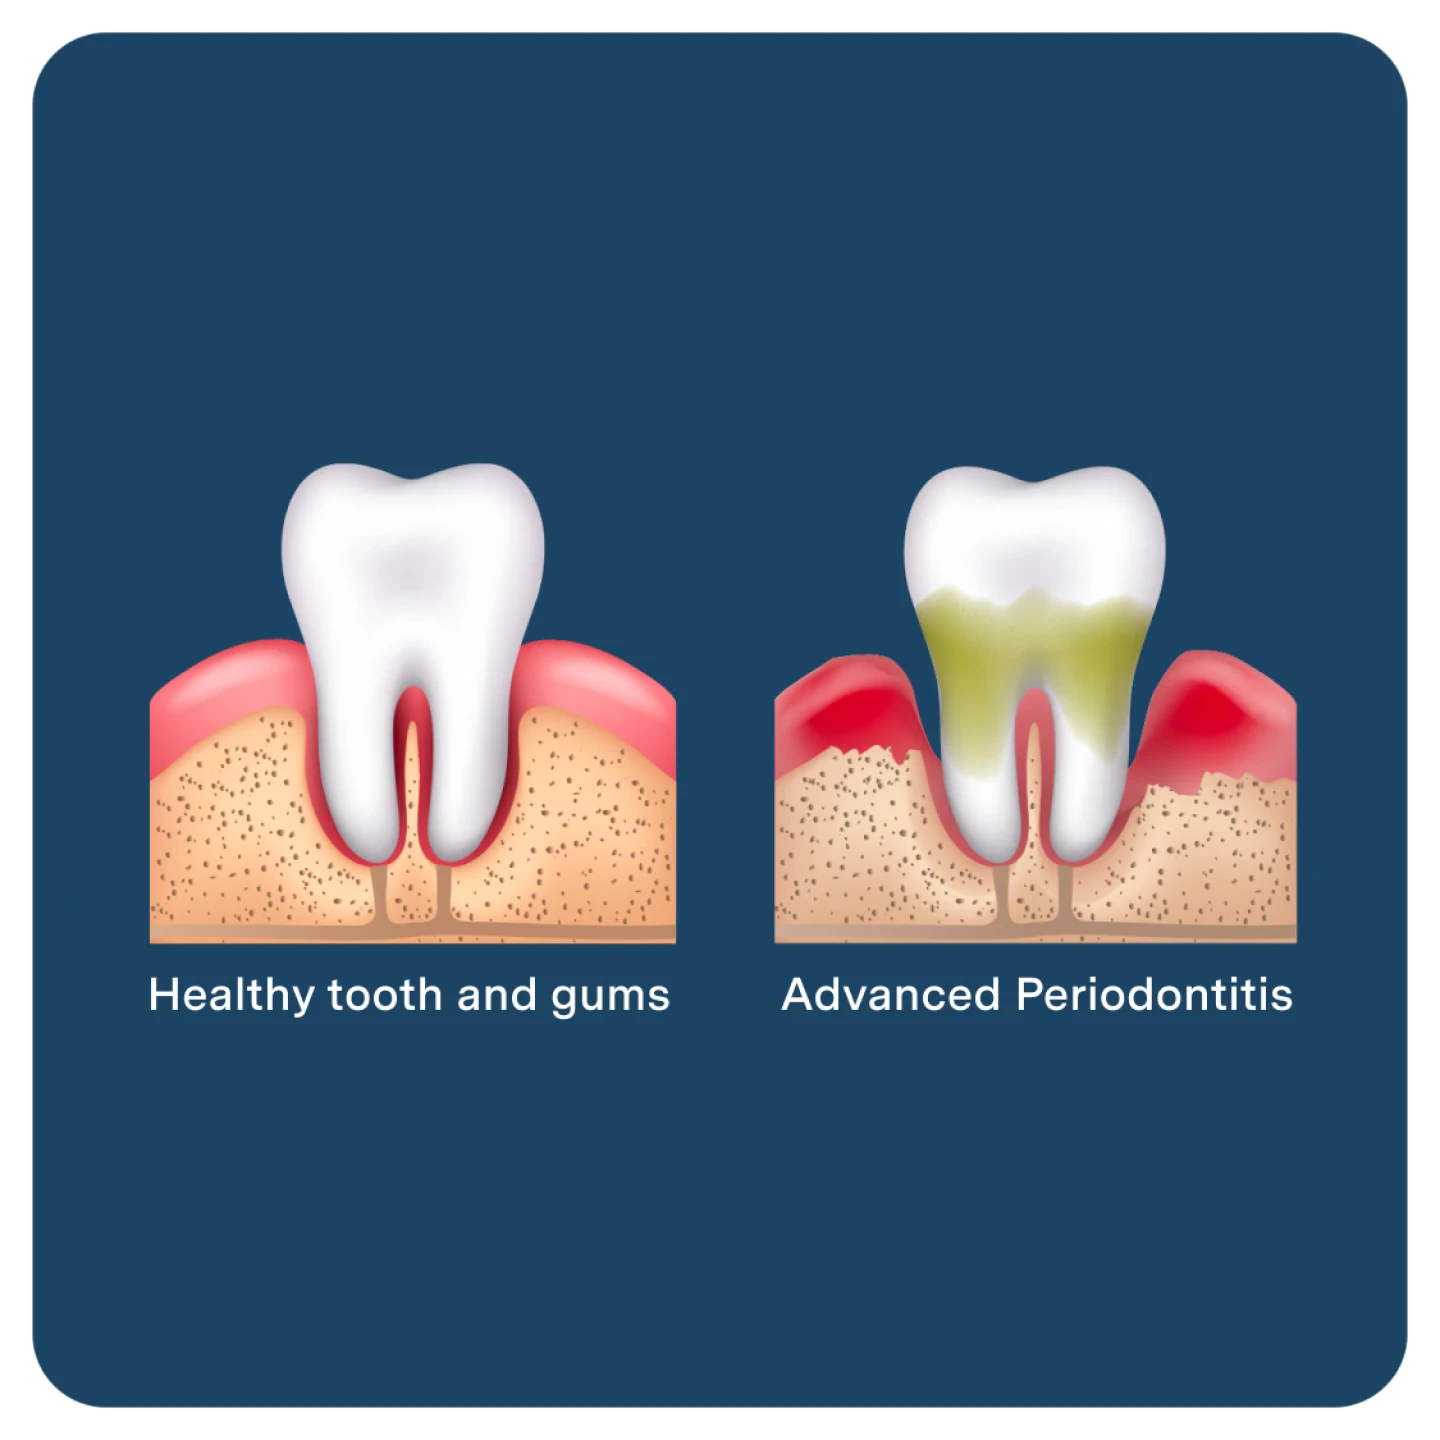 Comparison of healthy tooth and gums with advanced periodontitis. Healthy: pink gums, white tooth. Diseased: red, swollen gums, tooth decay.